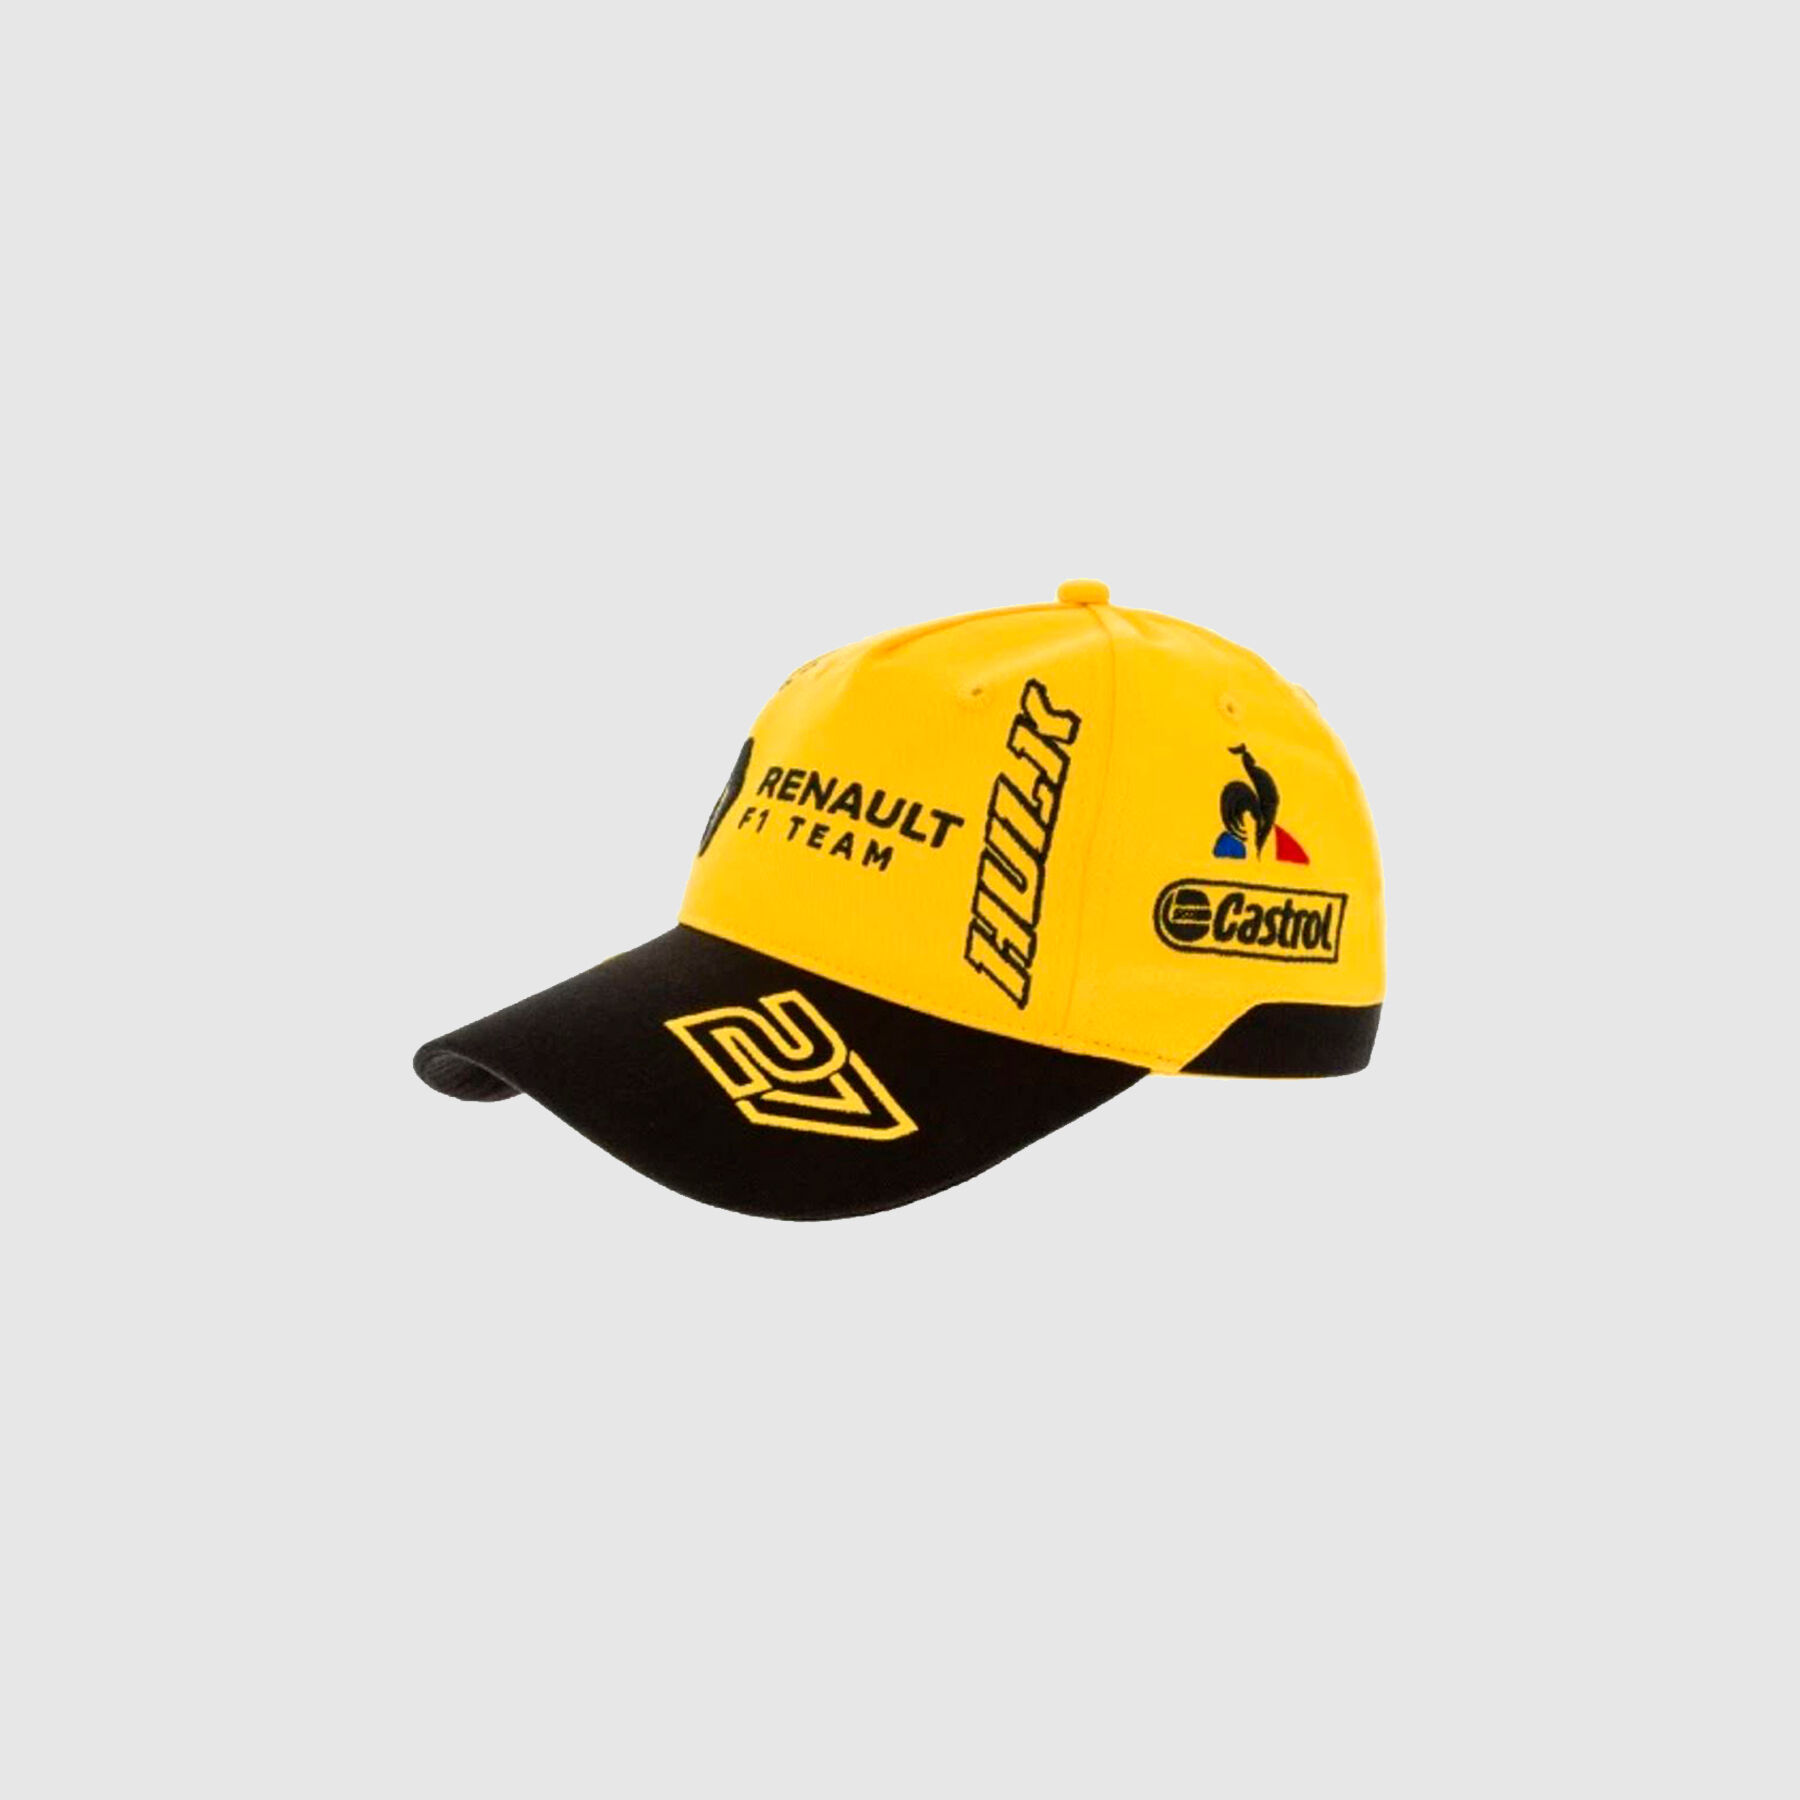 Renault F1 Team 2019 Baseball Cap YELLOW Adult One Size Official F1 Merchandise